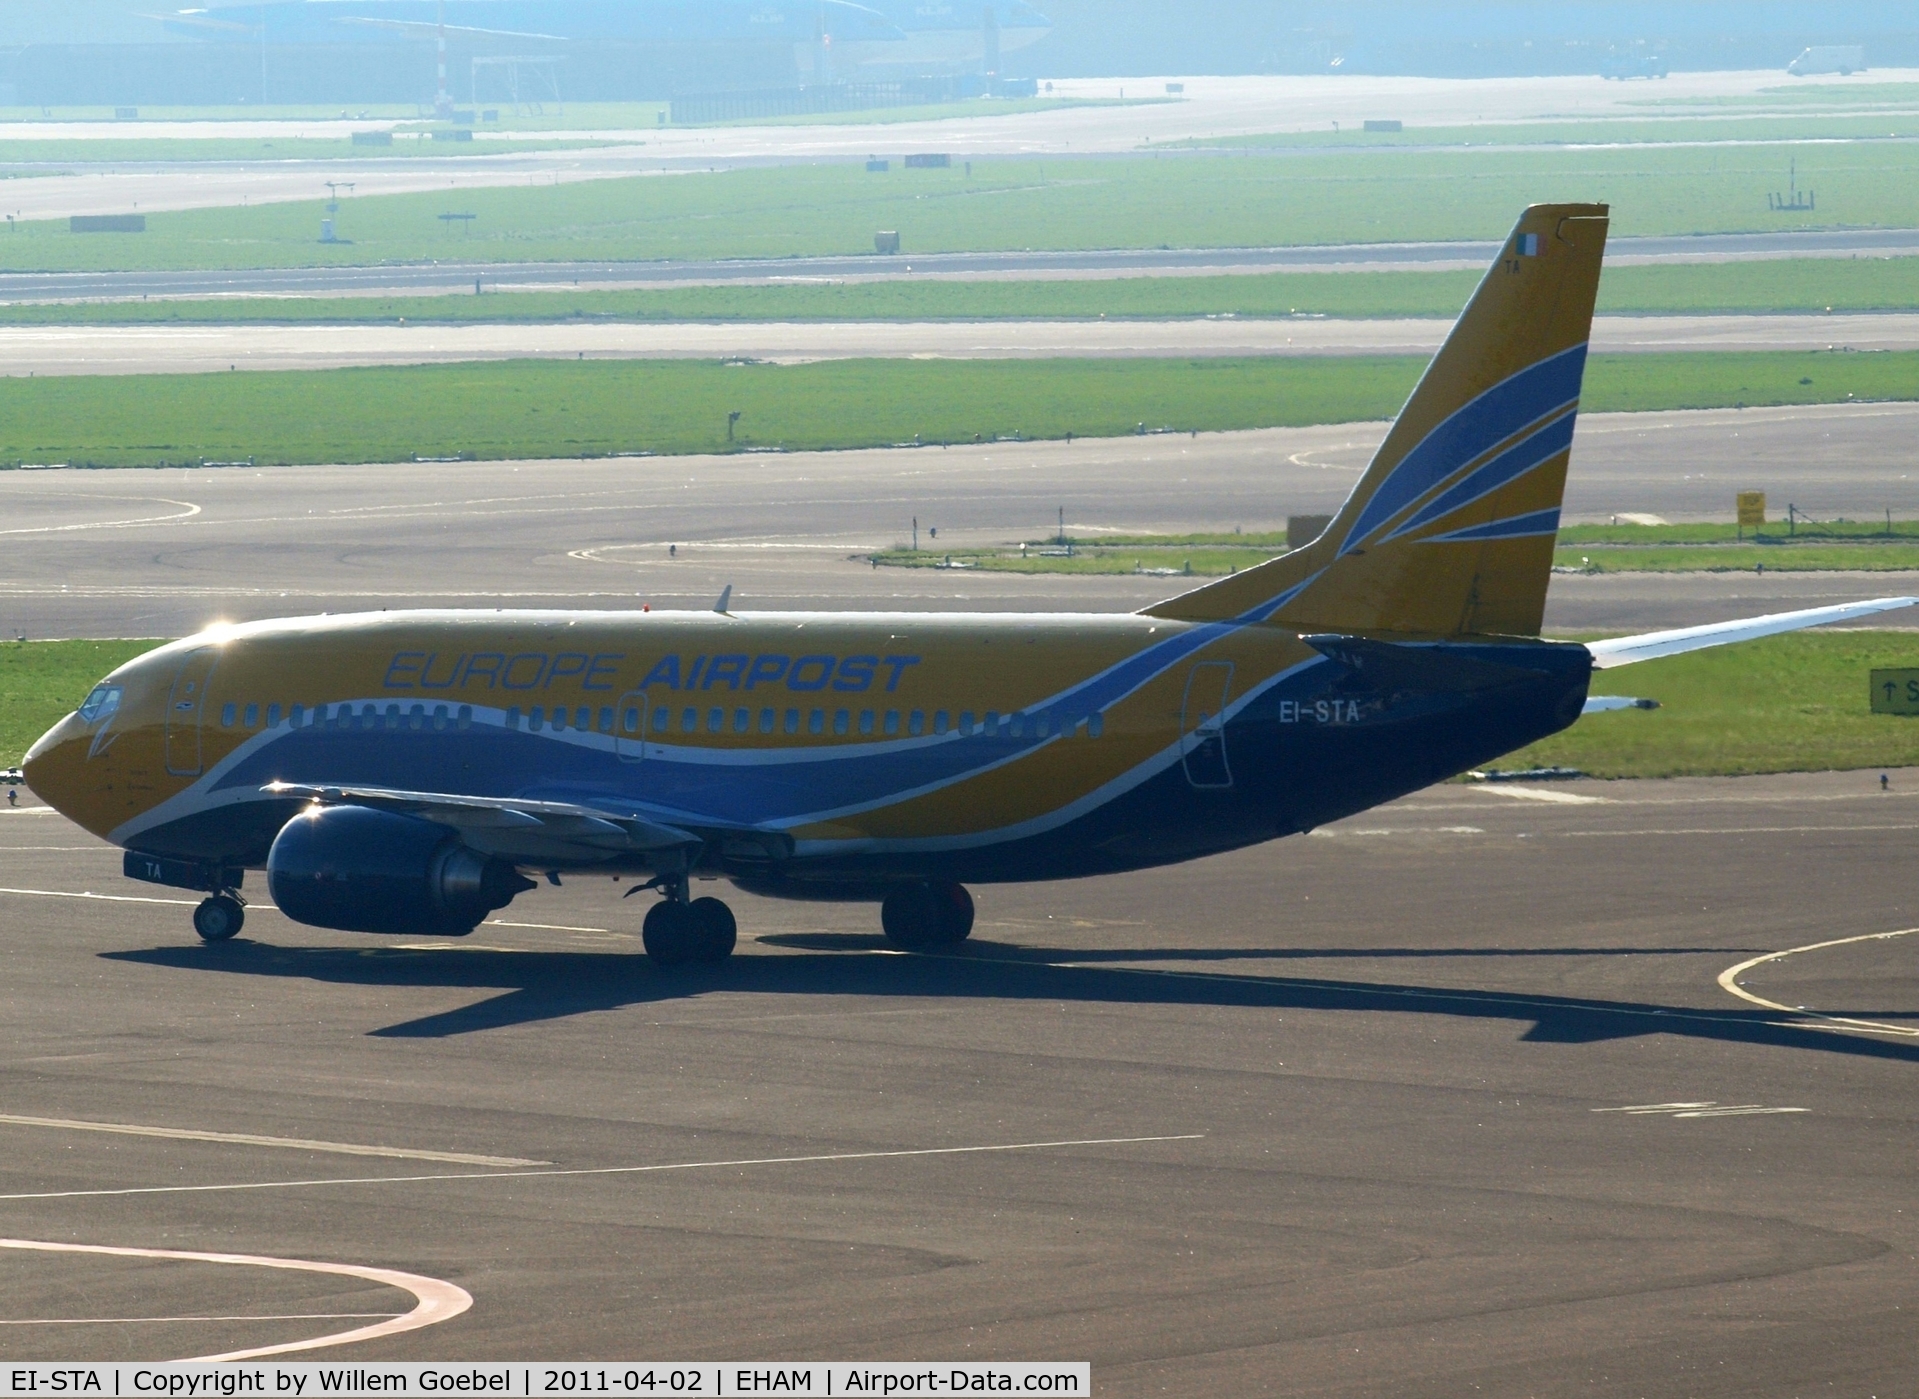 EI-STA, 1997 Boeing 737-31S C/N 29057, Taxi to runway L18 of Schiphol Airport